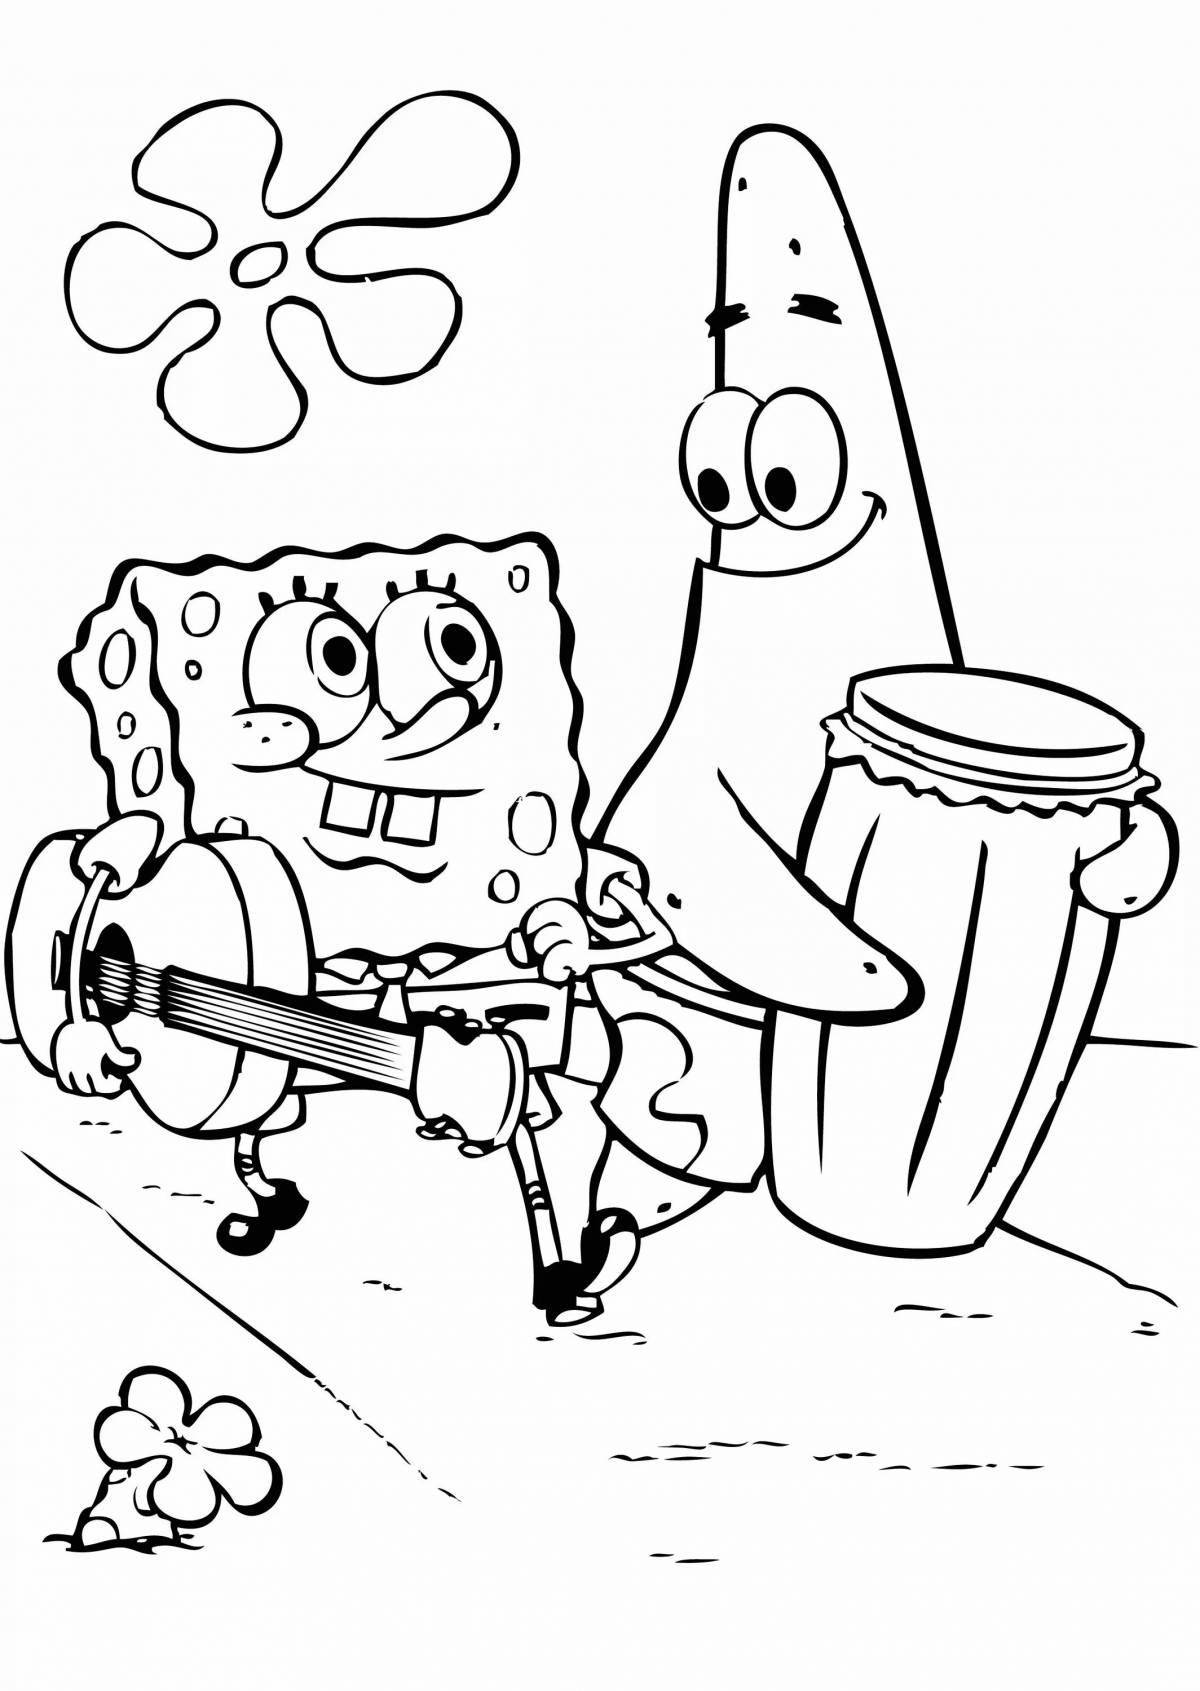 Lucky coloring page - great